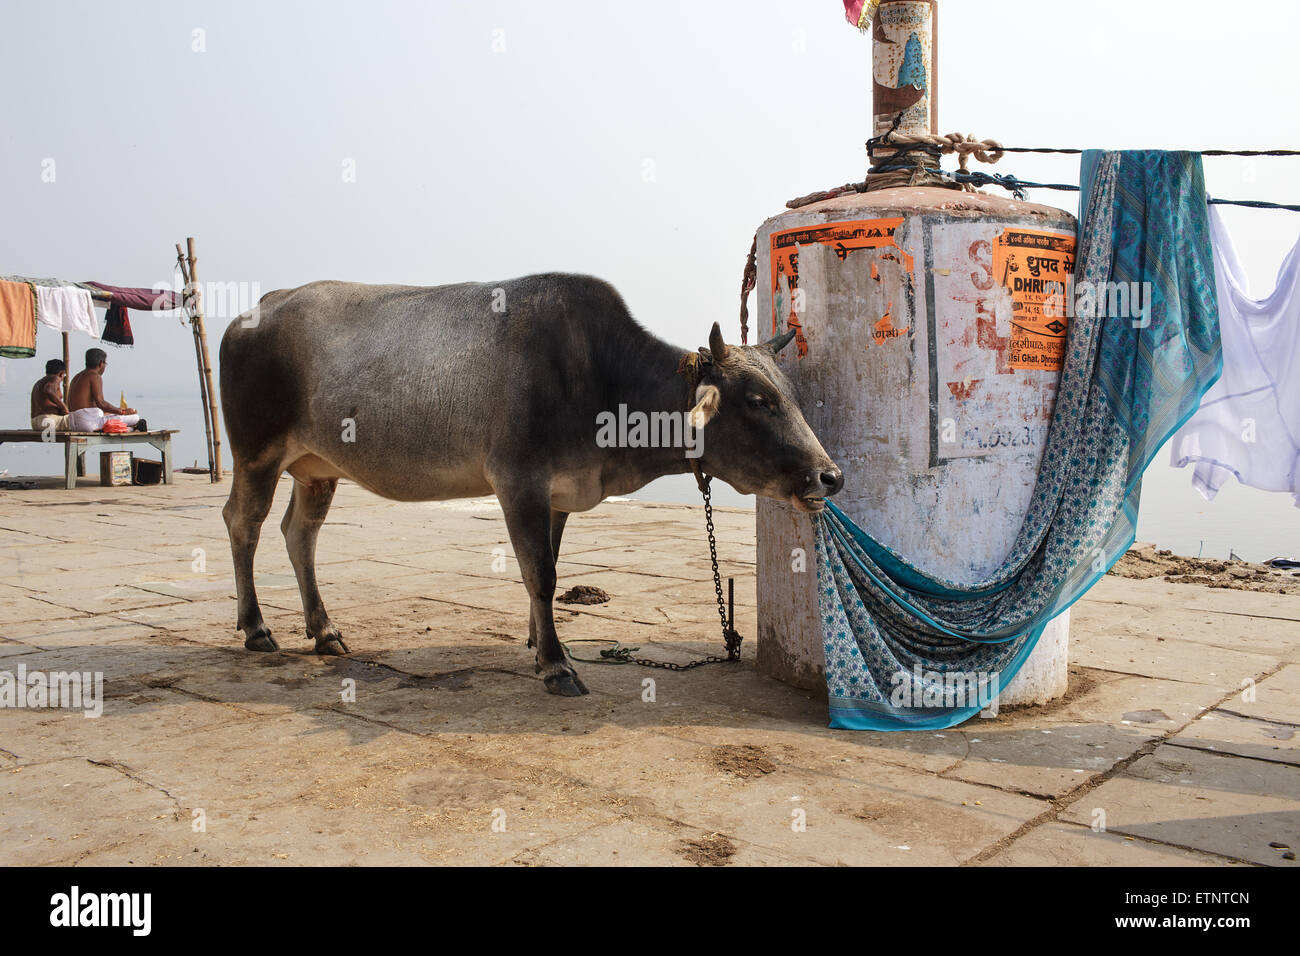 A cow chewing drying clothes on the Ganges ghats in Varanasi, India. Stock Photo